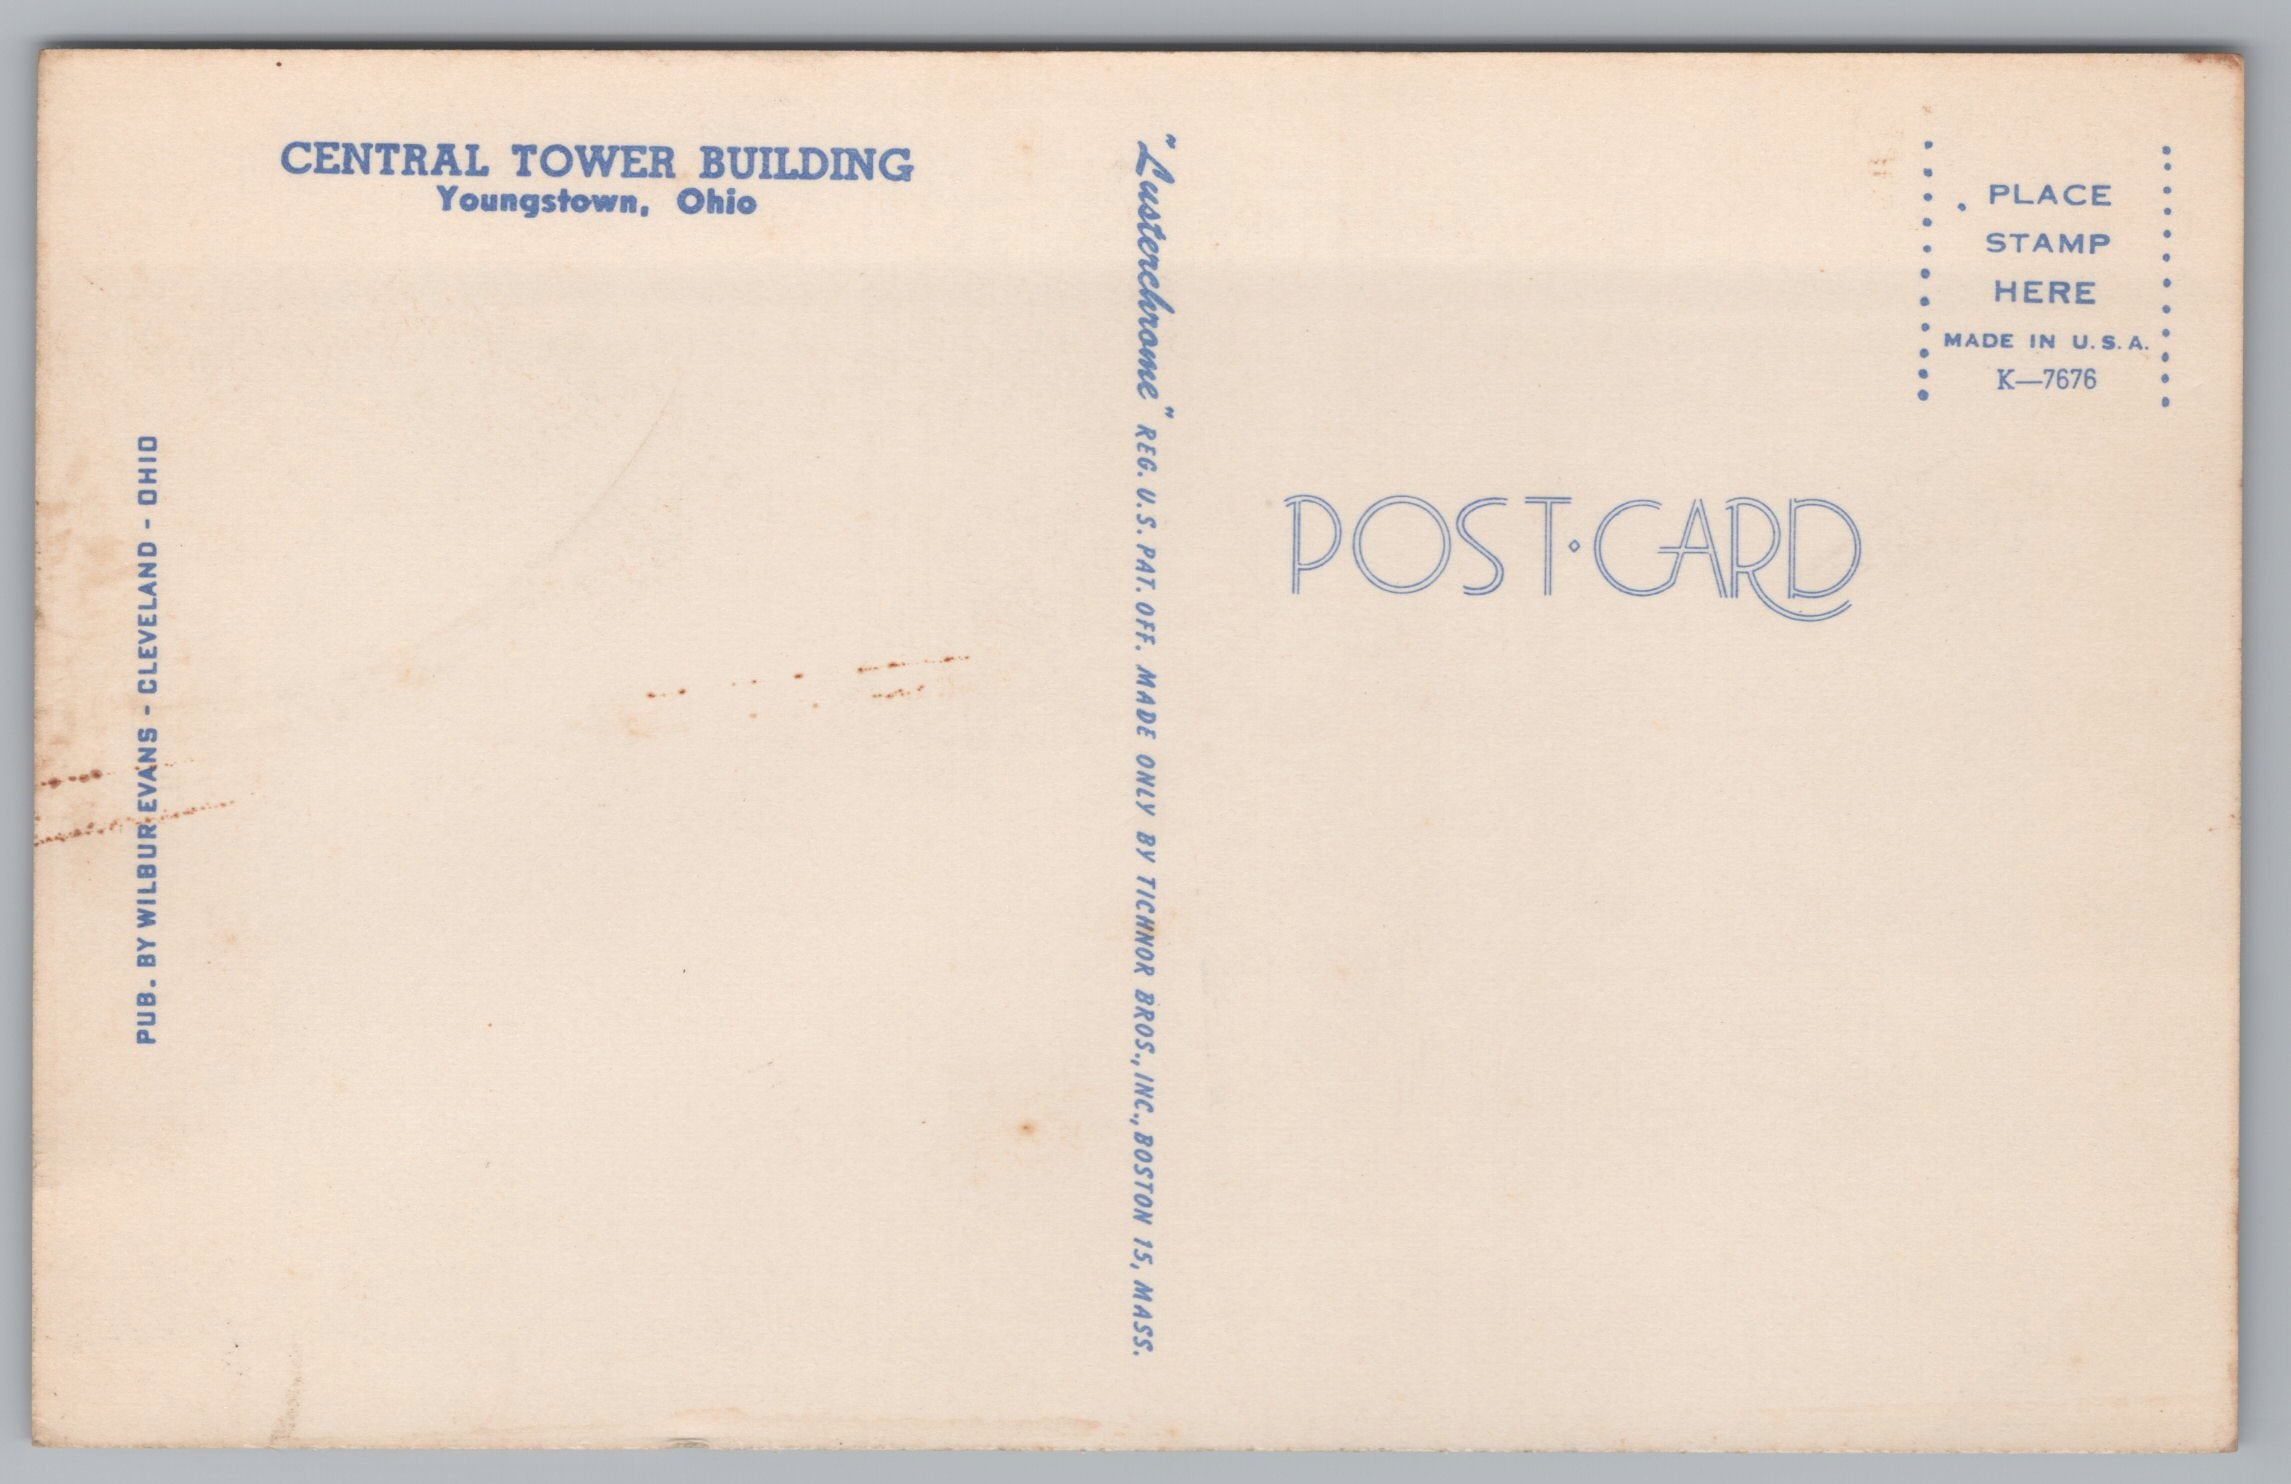 Central Tower Building, Youngstown, Ohio, Vintage Post Card.